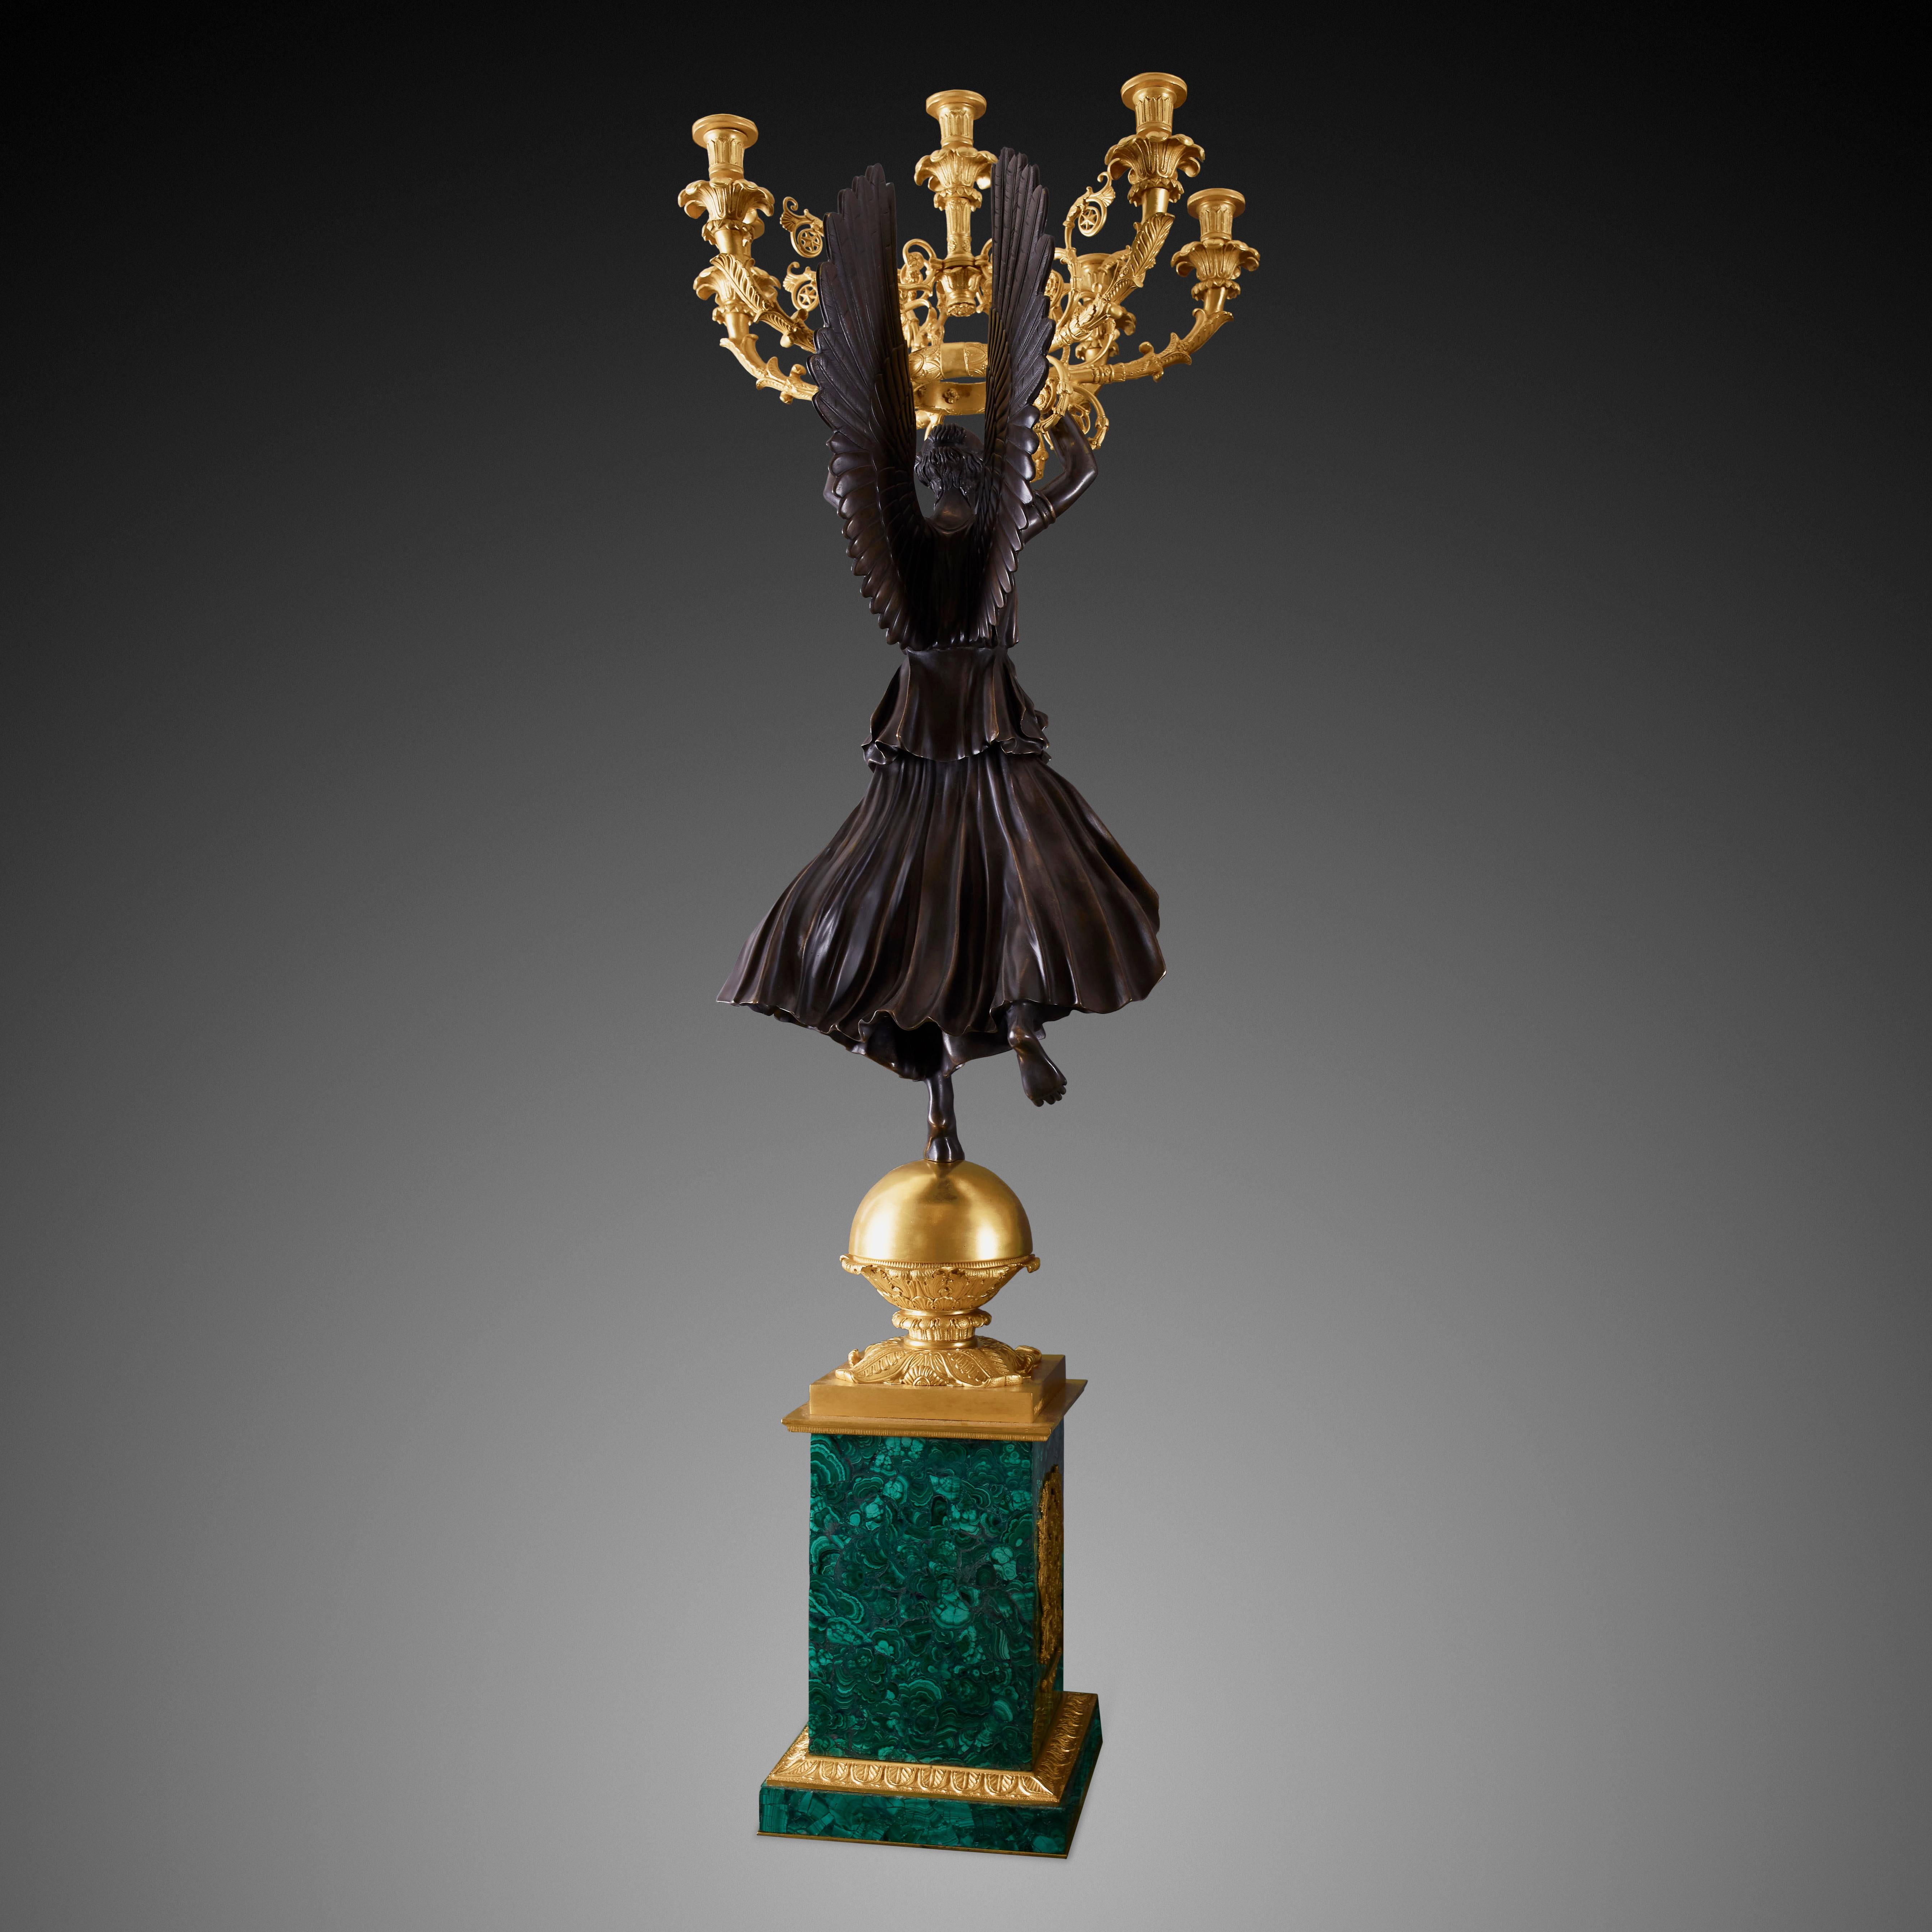 This stunning pair of candelabras comes in a set with equally beautiful mantel clock. This pair of early French empire candelabra were crafted using the two most luxurious ingredients globally: Bronze and Malachite, which creates a magnificent